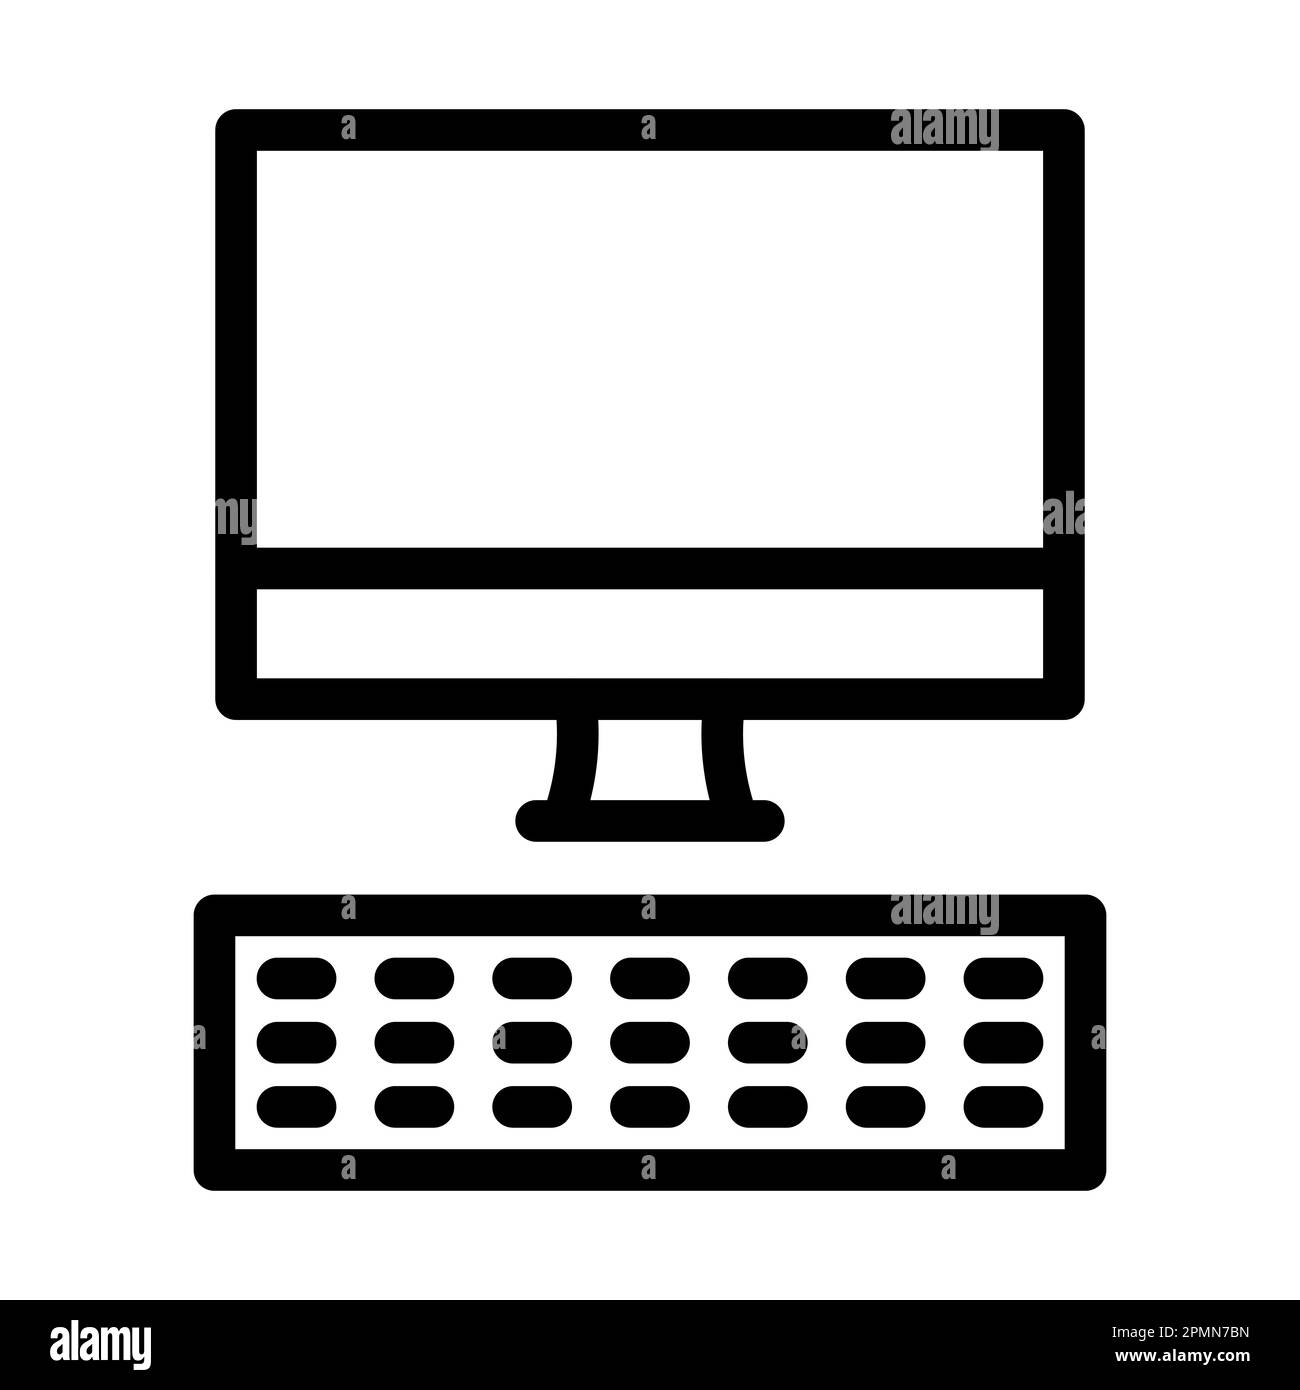 Computer Vector Thick Line Icon For Personal And Commercial Use. Stock Photo